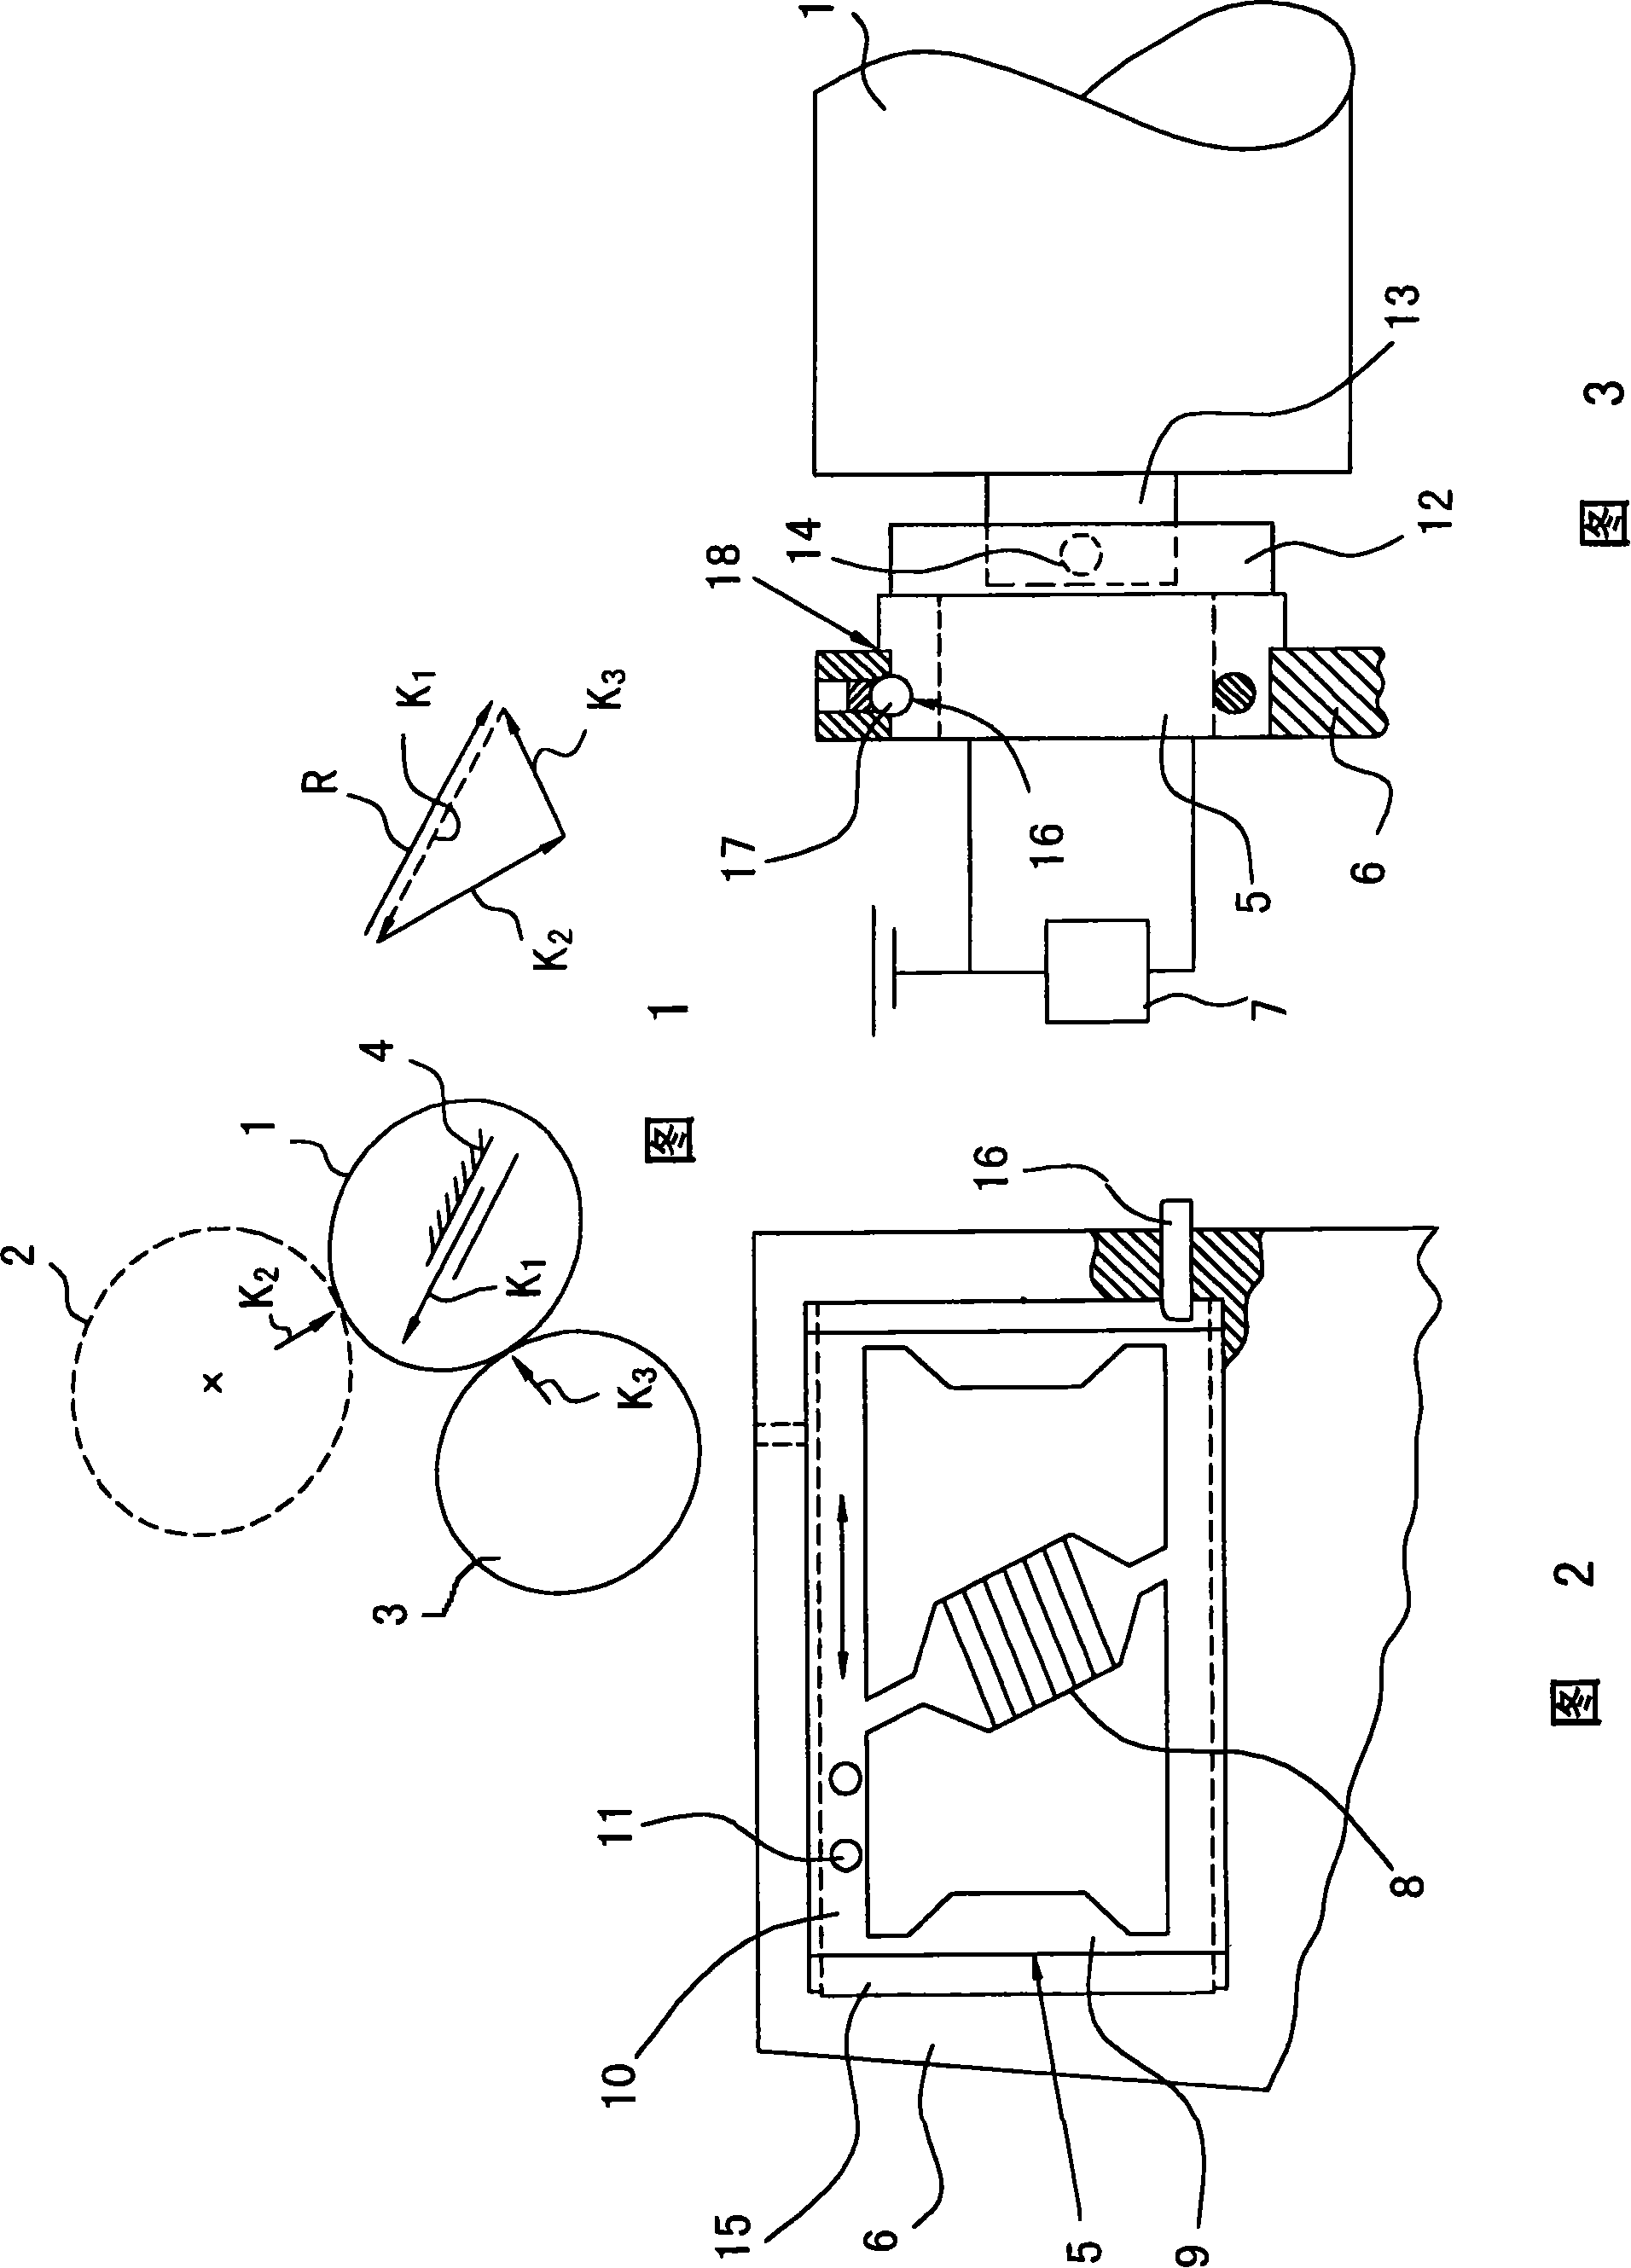 Roller pressing device